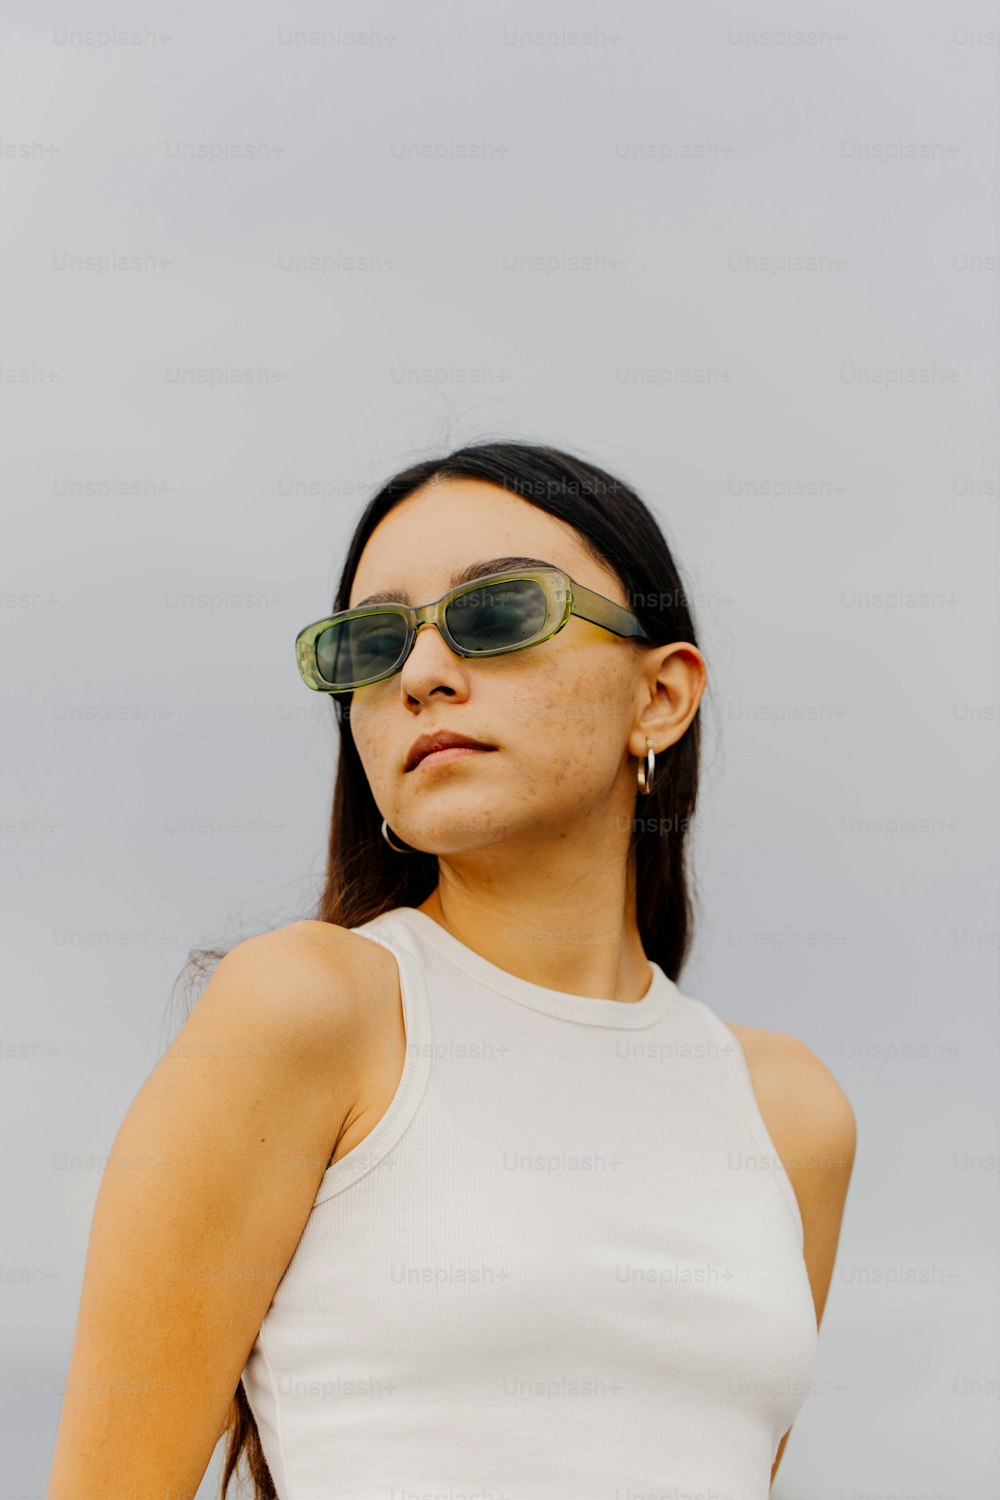 a woman wearing sunglasses and a white top